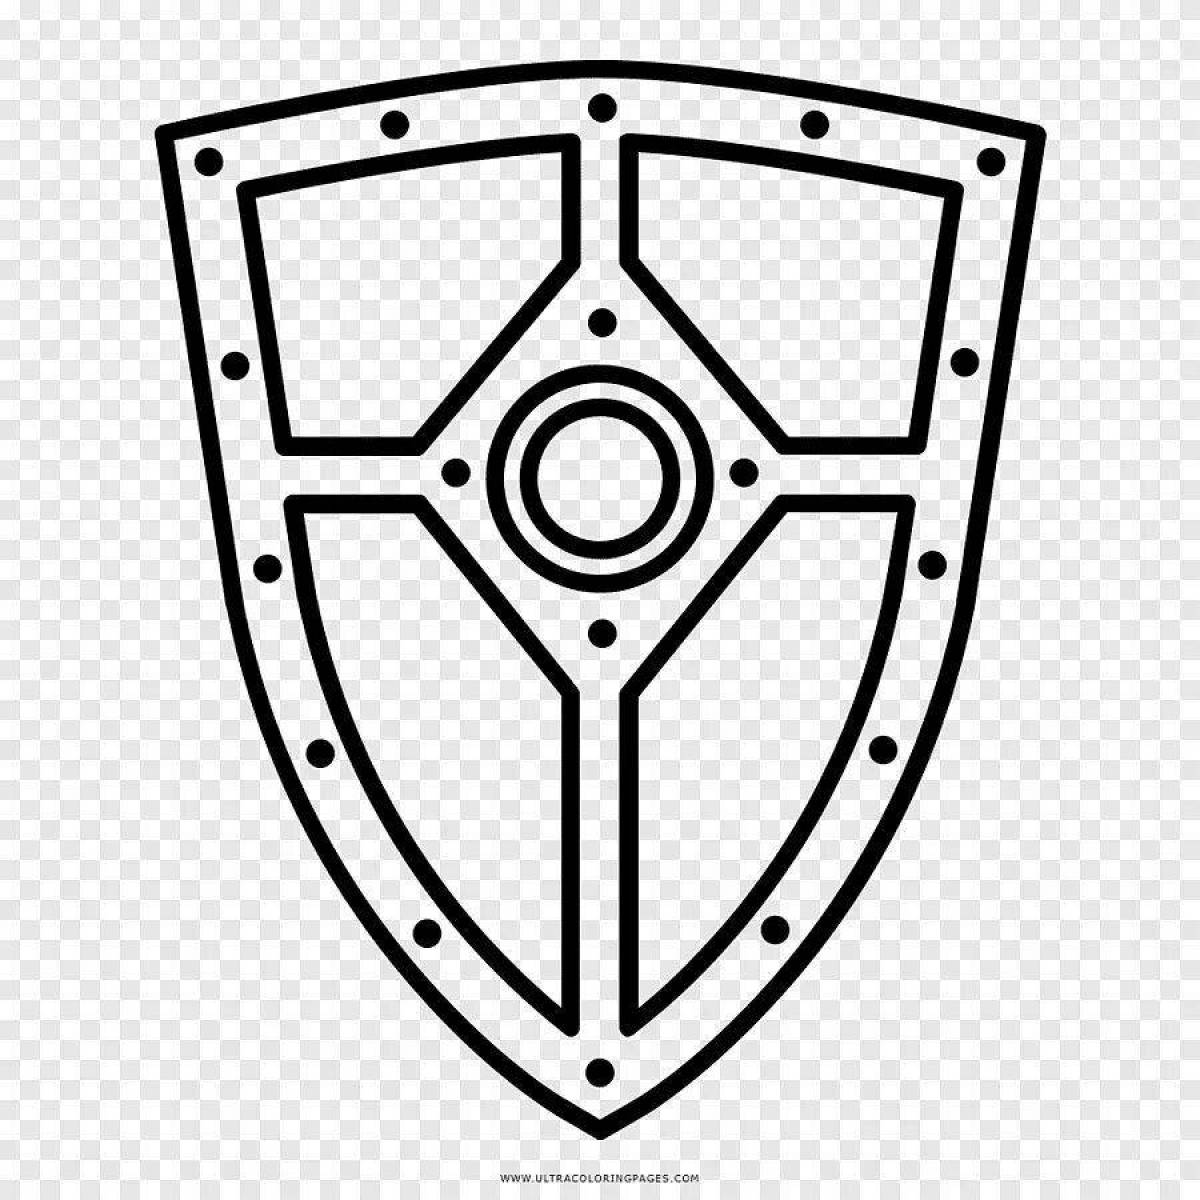 Perfect hero's shield coloring page for juniors